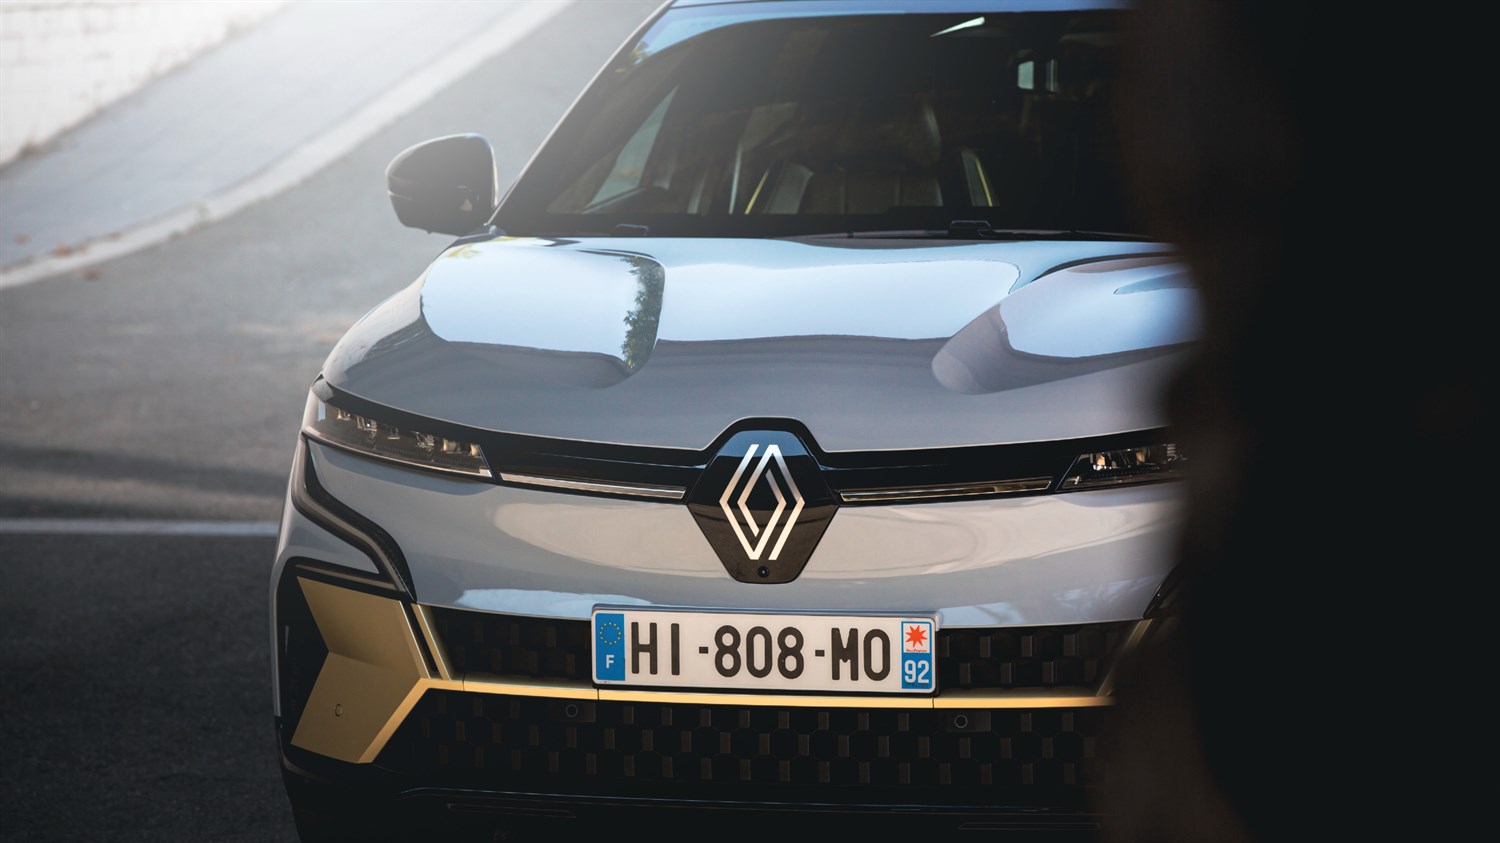 Mégane eVision is the new electric show-car unveiled by Renault